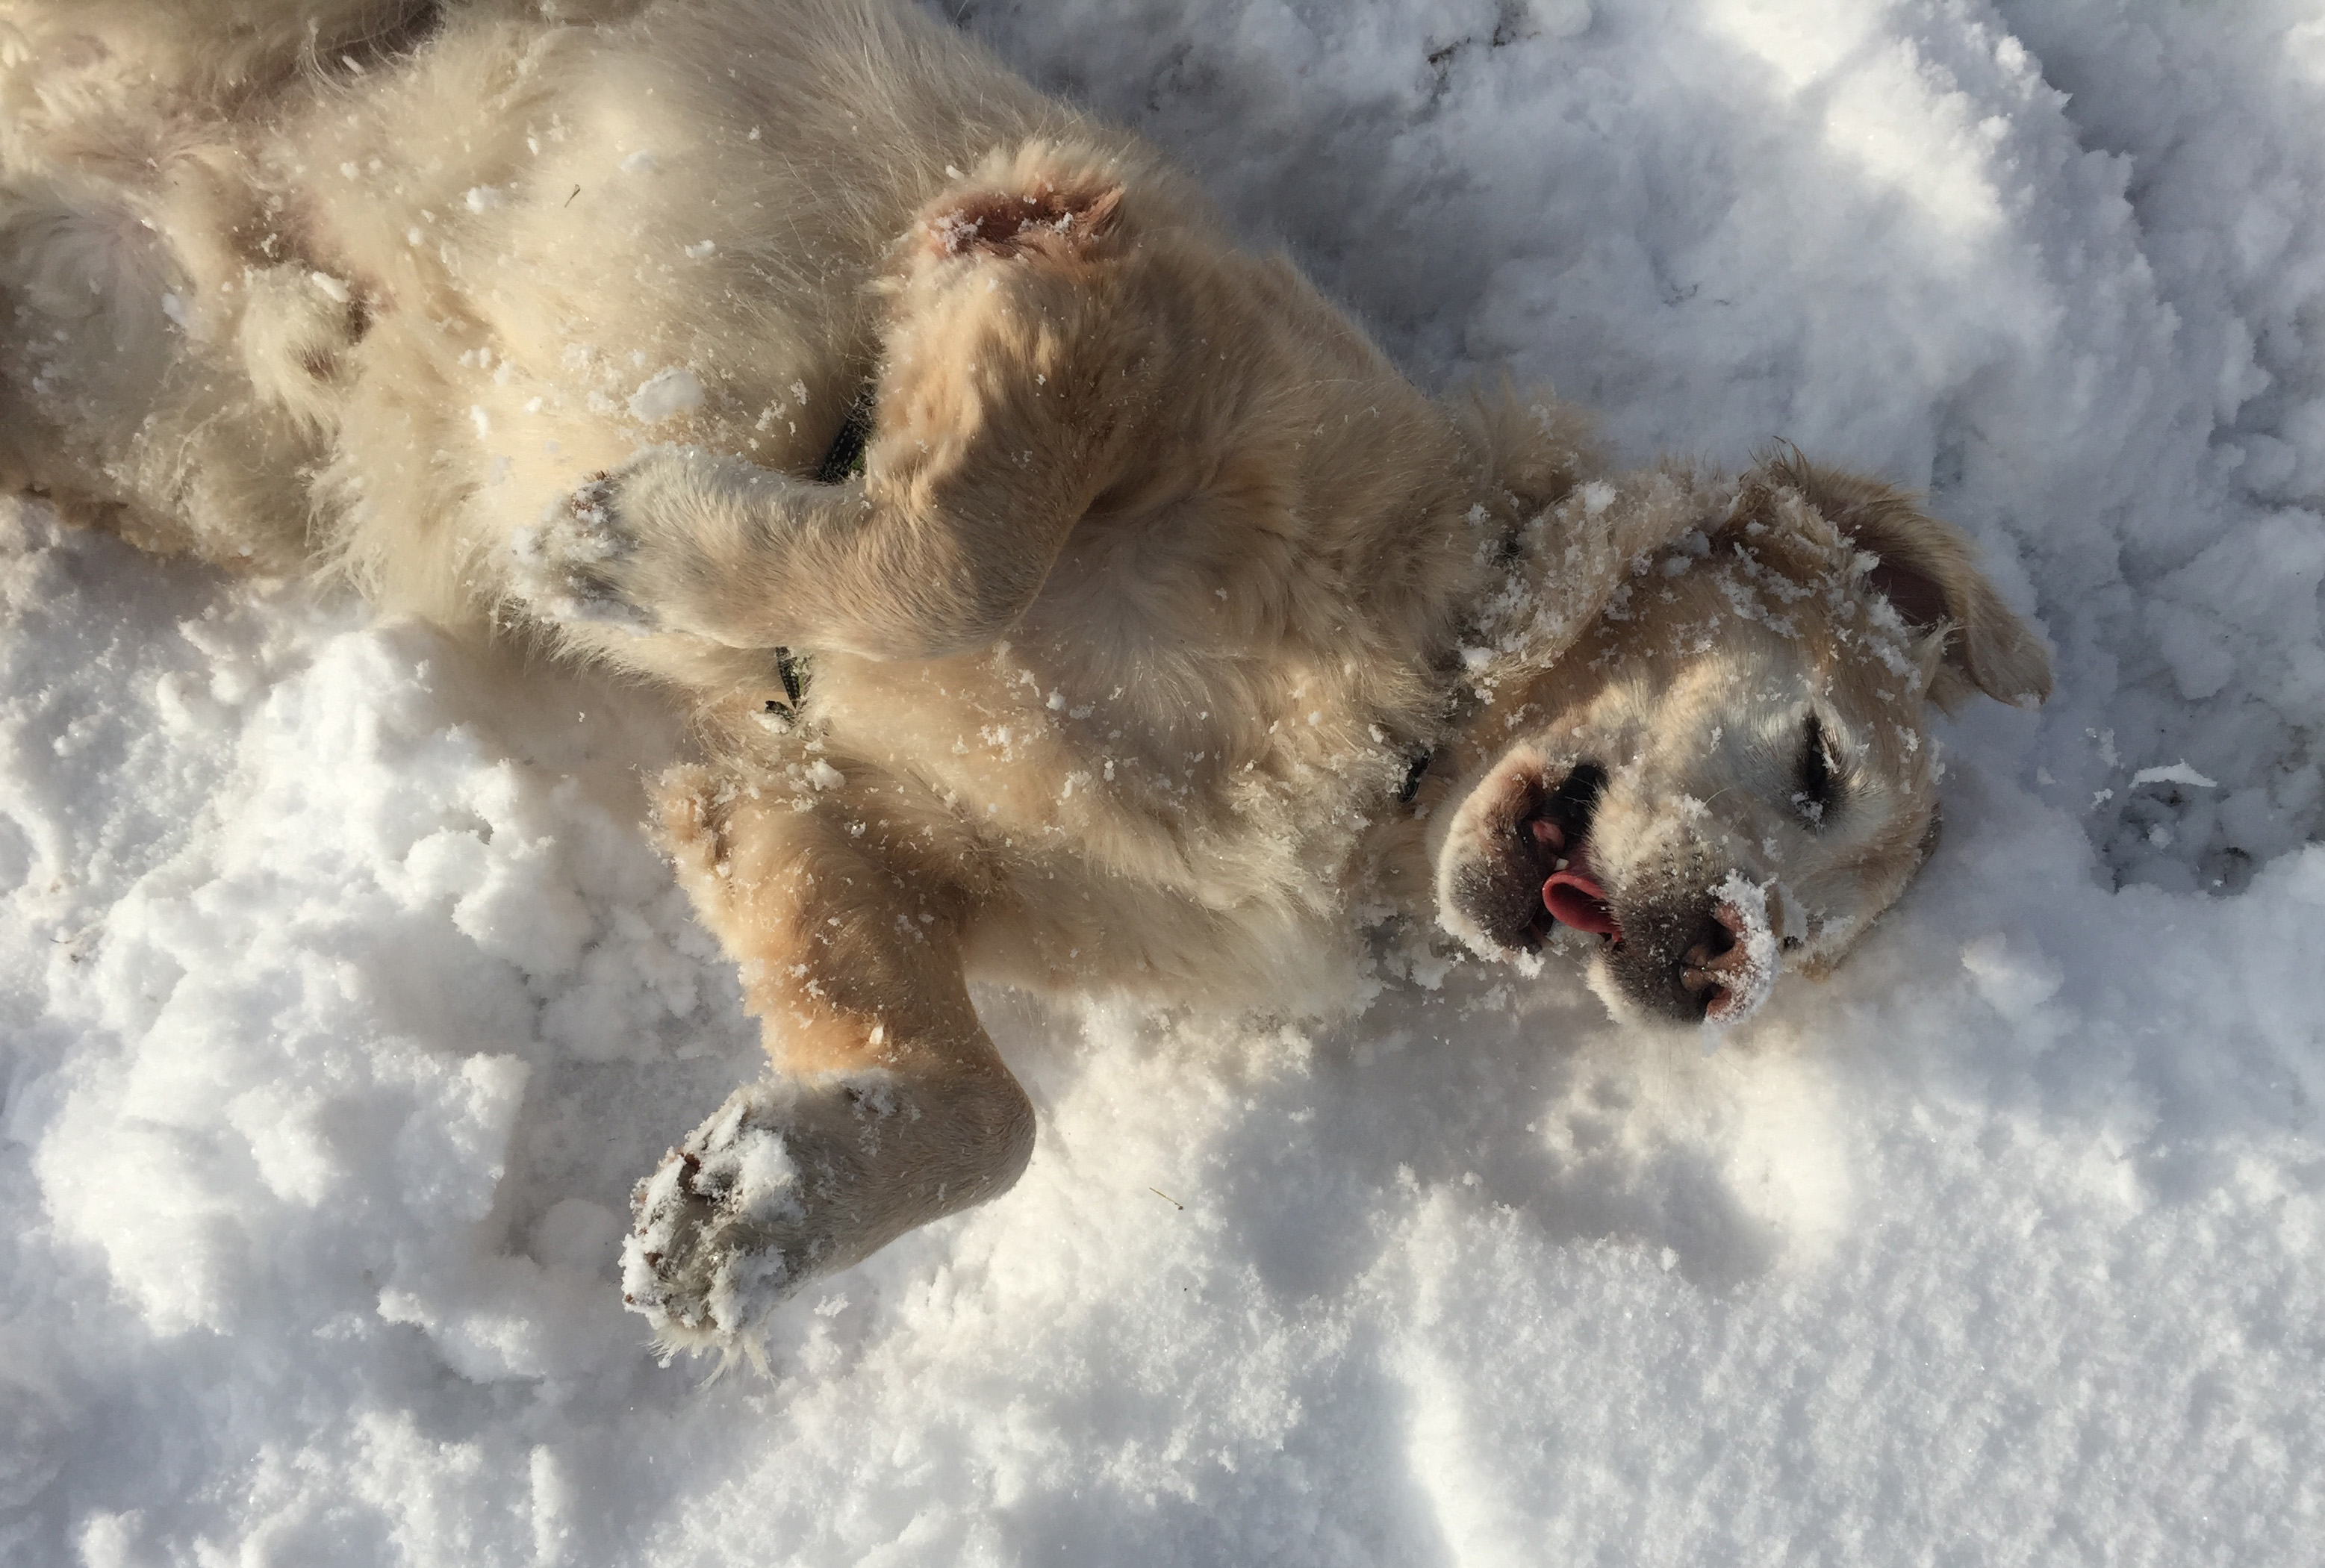 Dog wallowing in snow photo